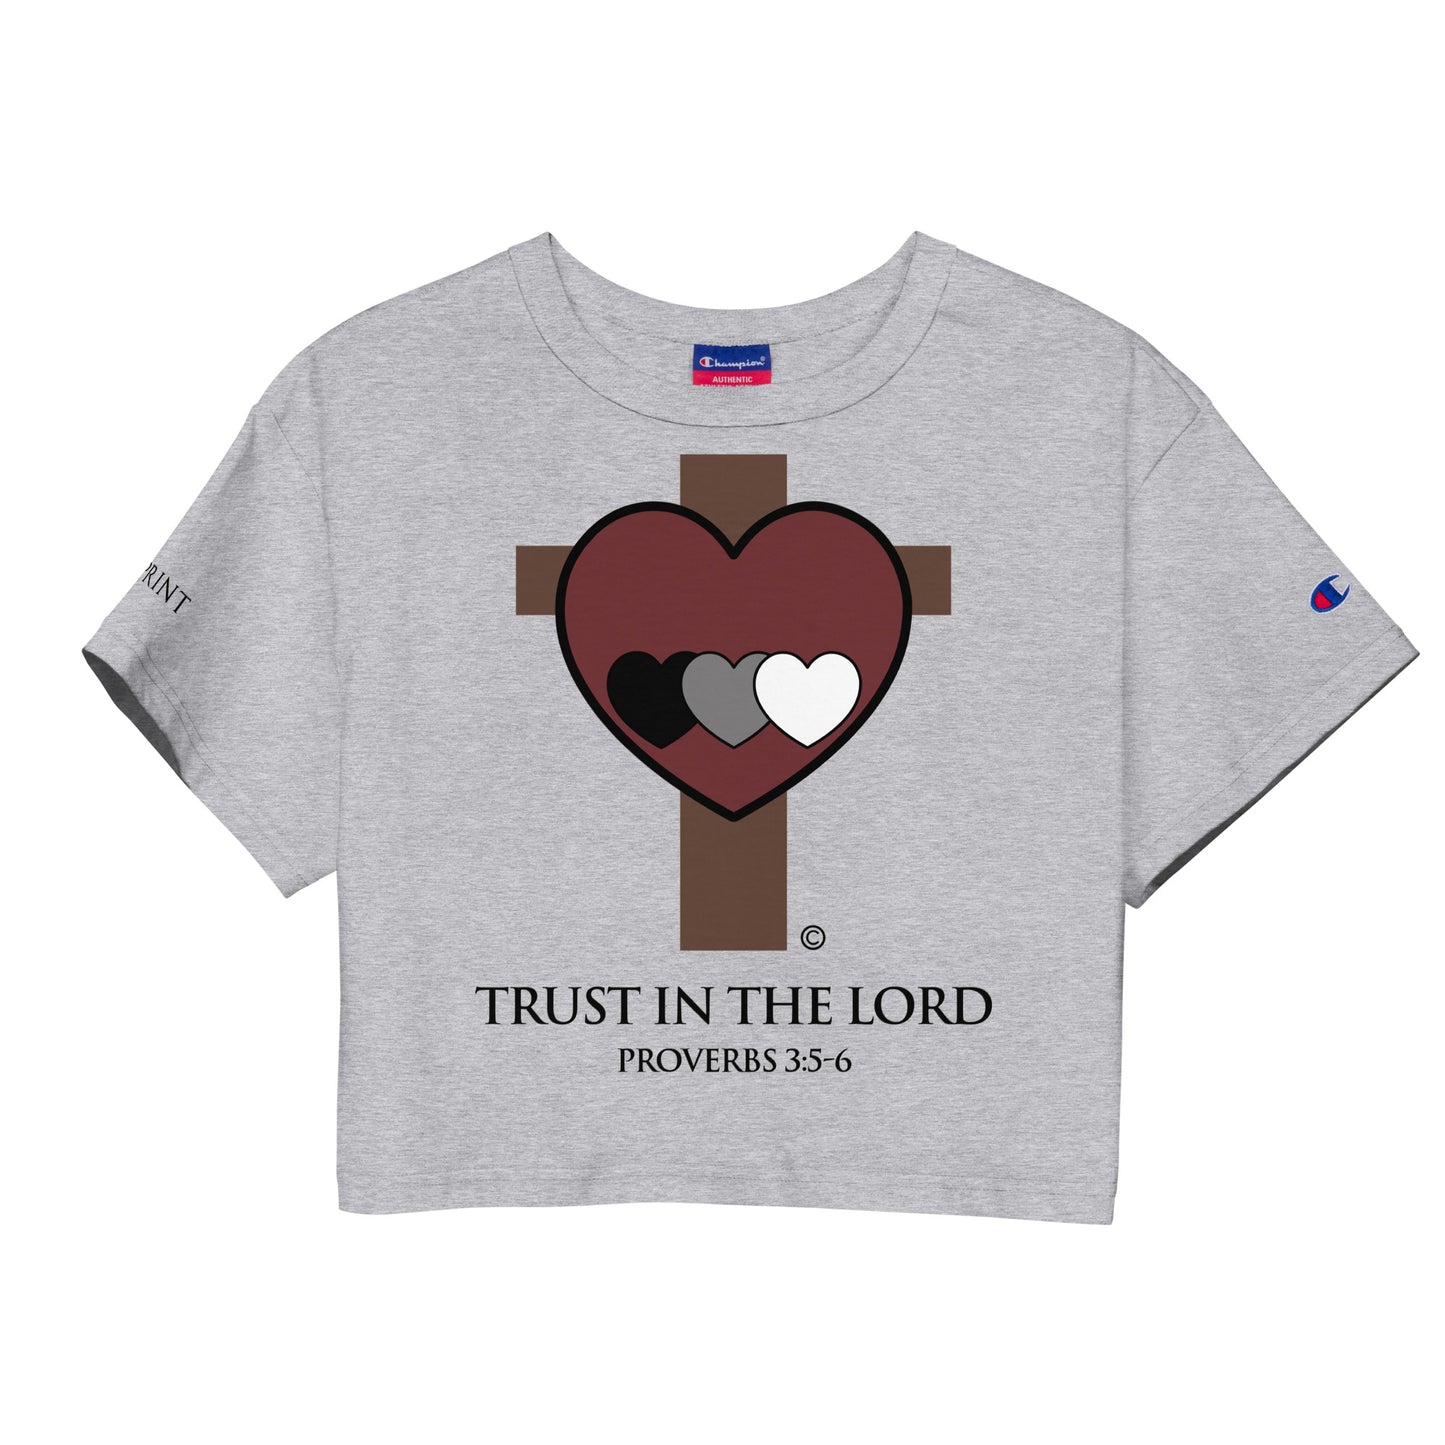 Trust in the Lord Champion Crop Top